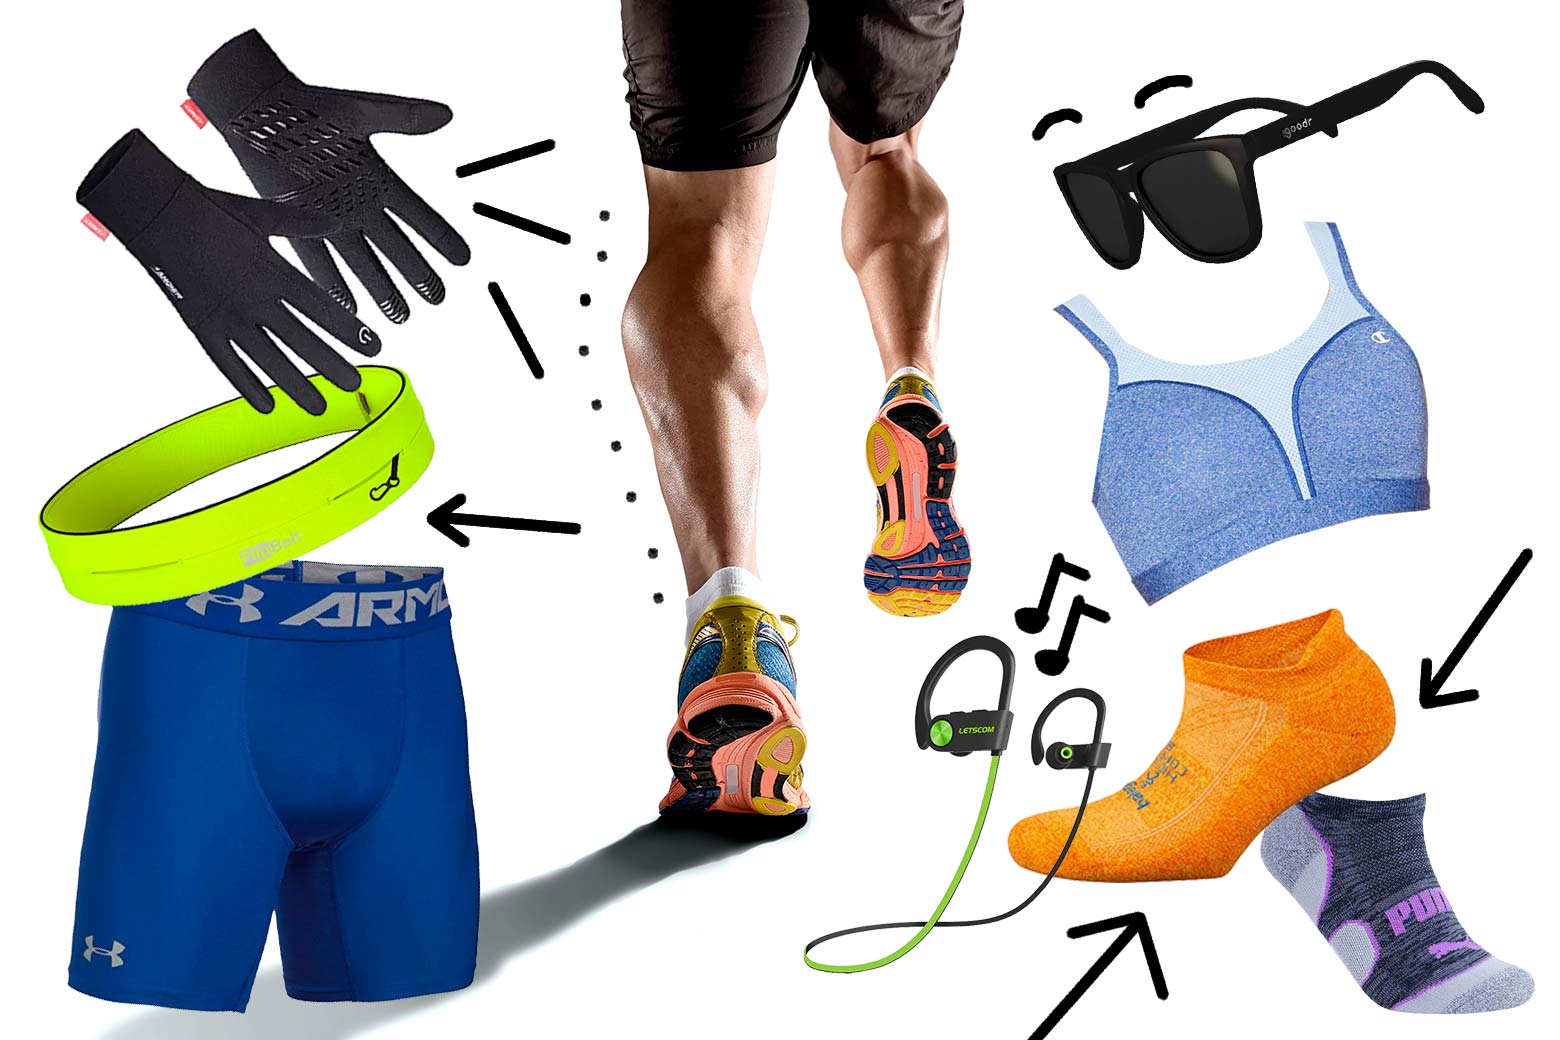 Legs run away, surrounded by various products recommended in this article.